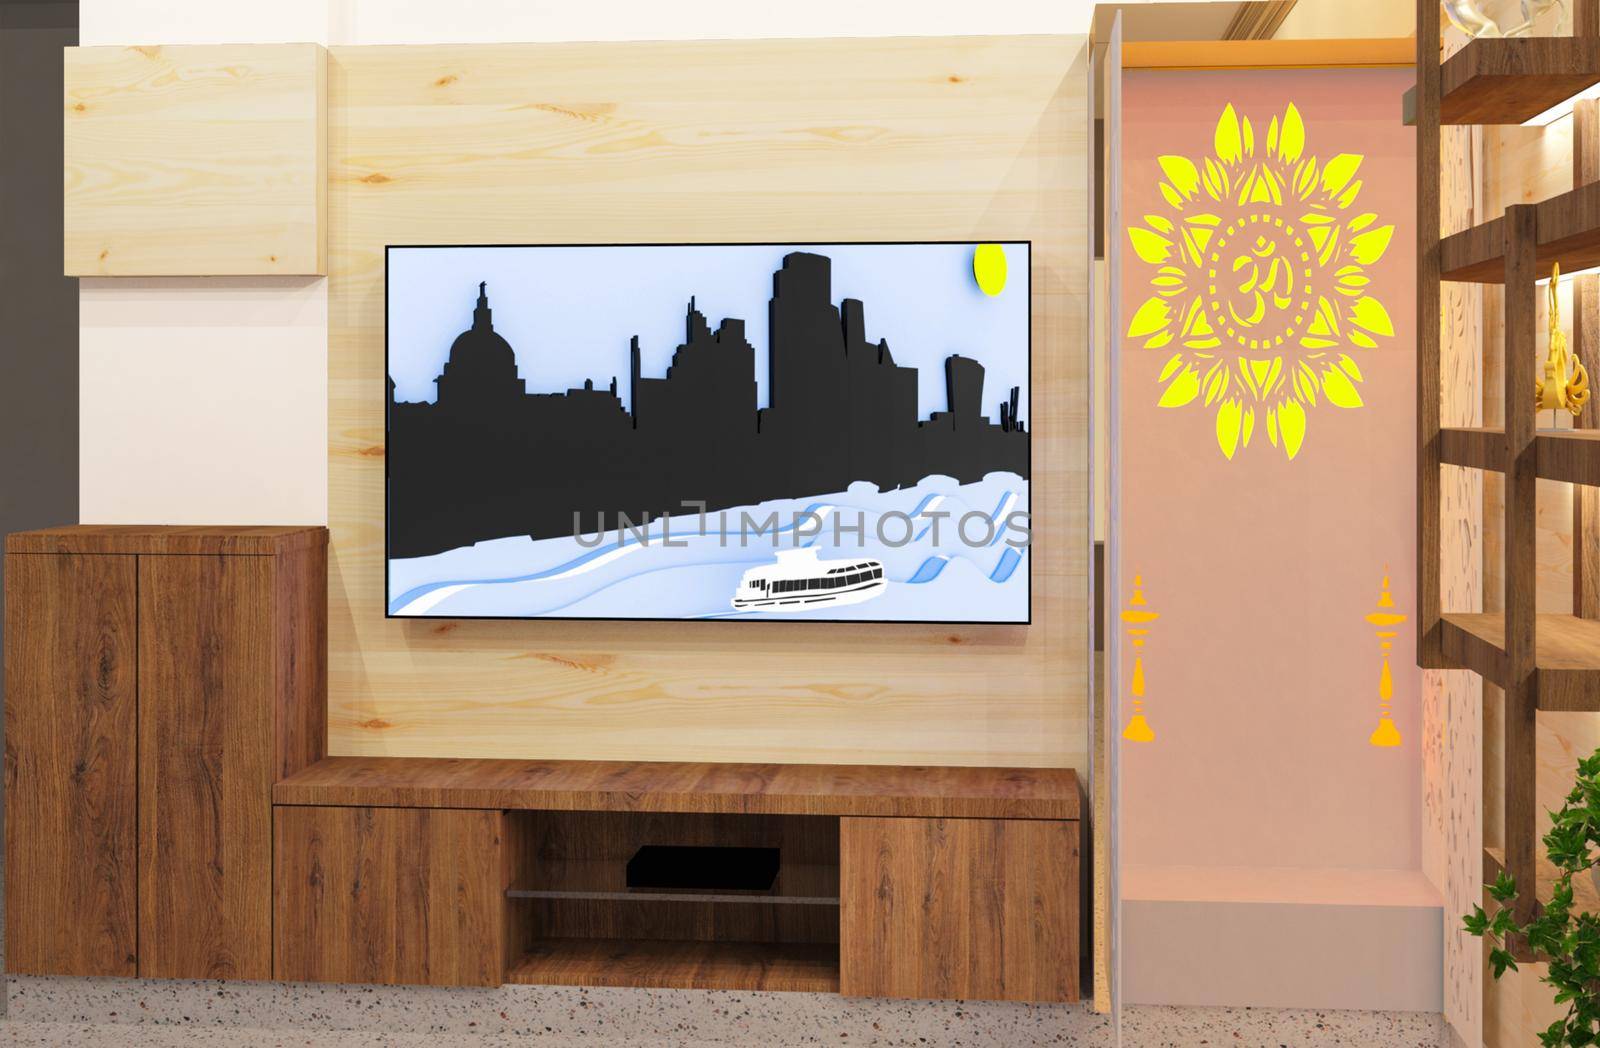 3d rendered pine wood wall decoration with walnut wood cove light shelve and tv unit. by Maharana777